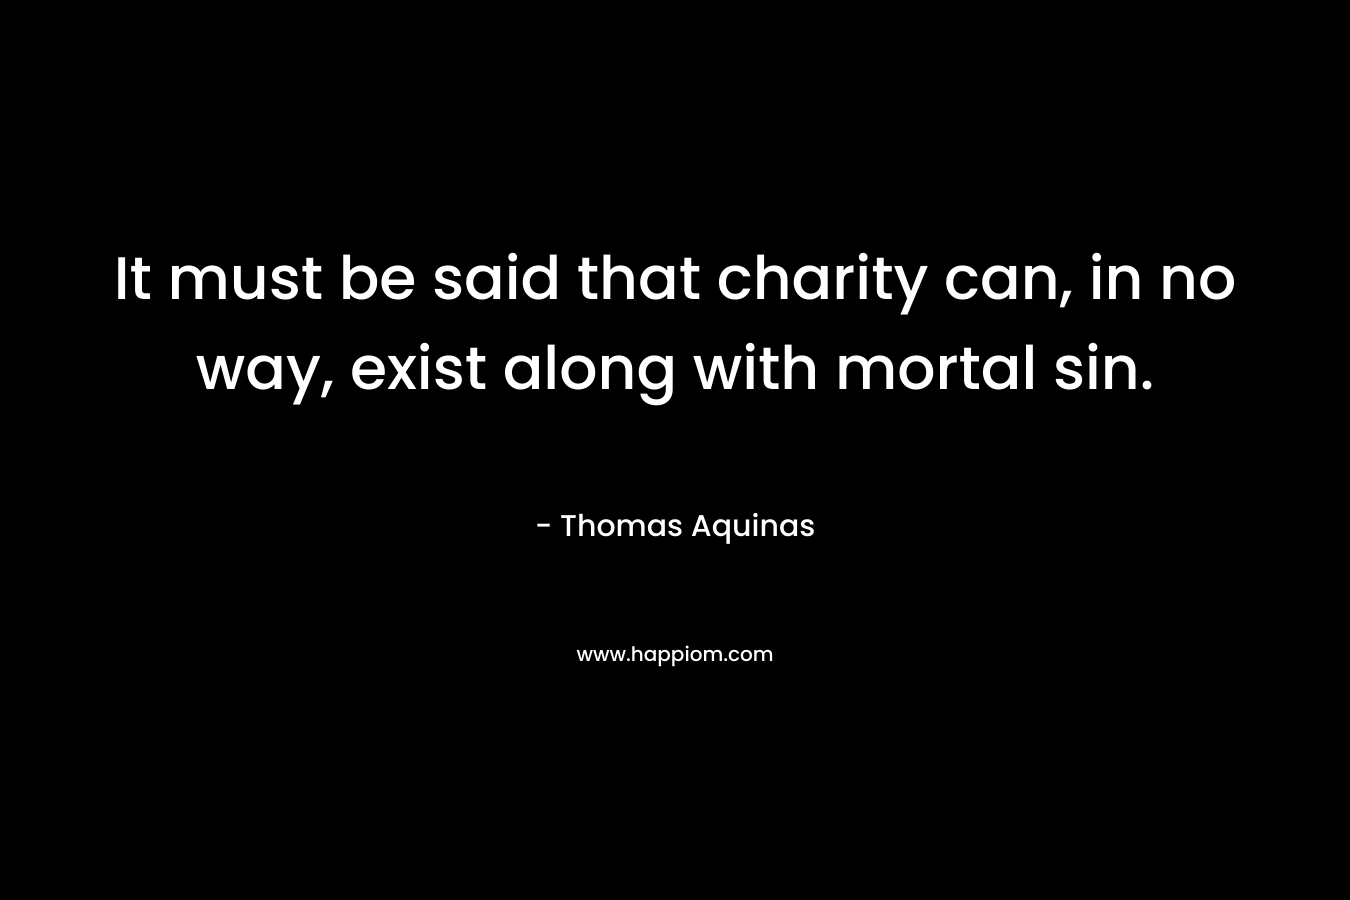 It must be said that charity can, in no way, exist along with mortal sin. – Thomas Aquinas